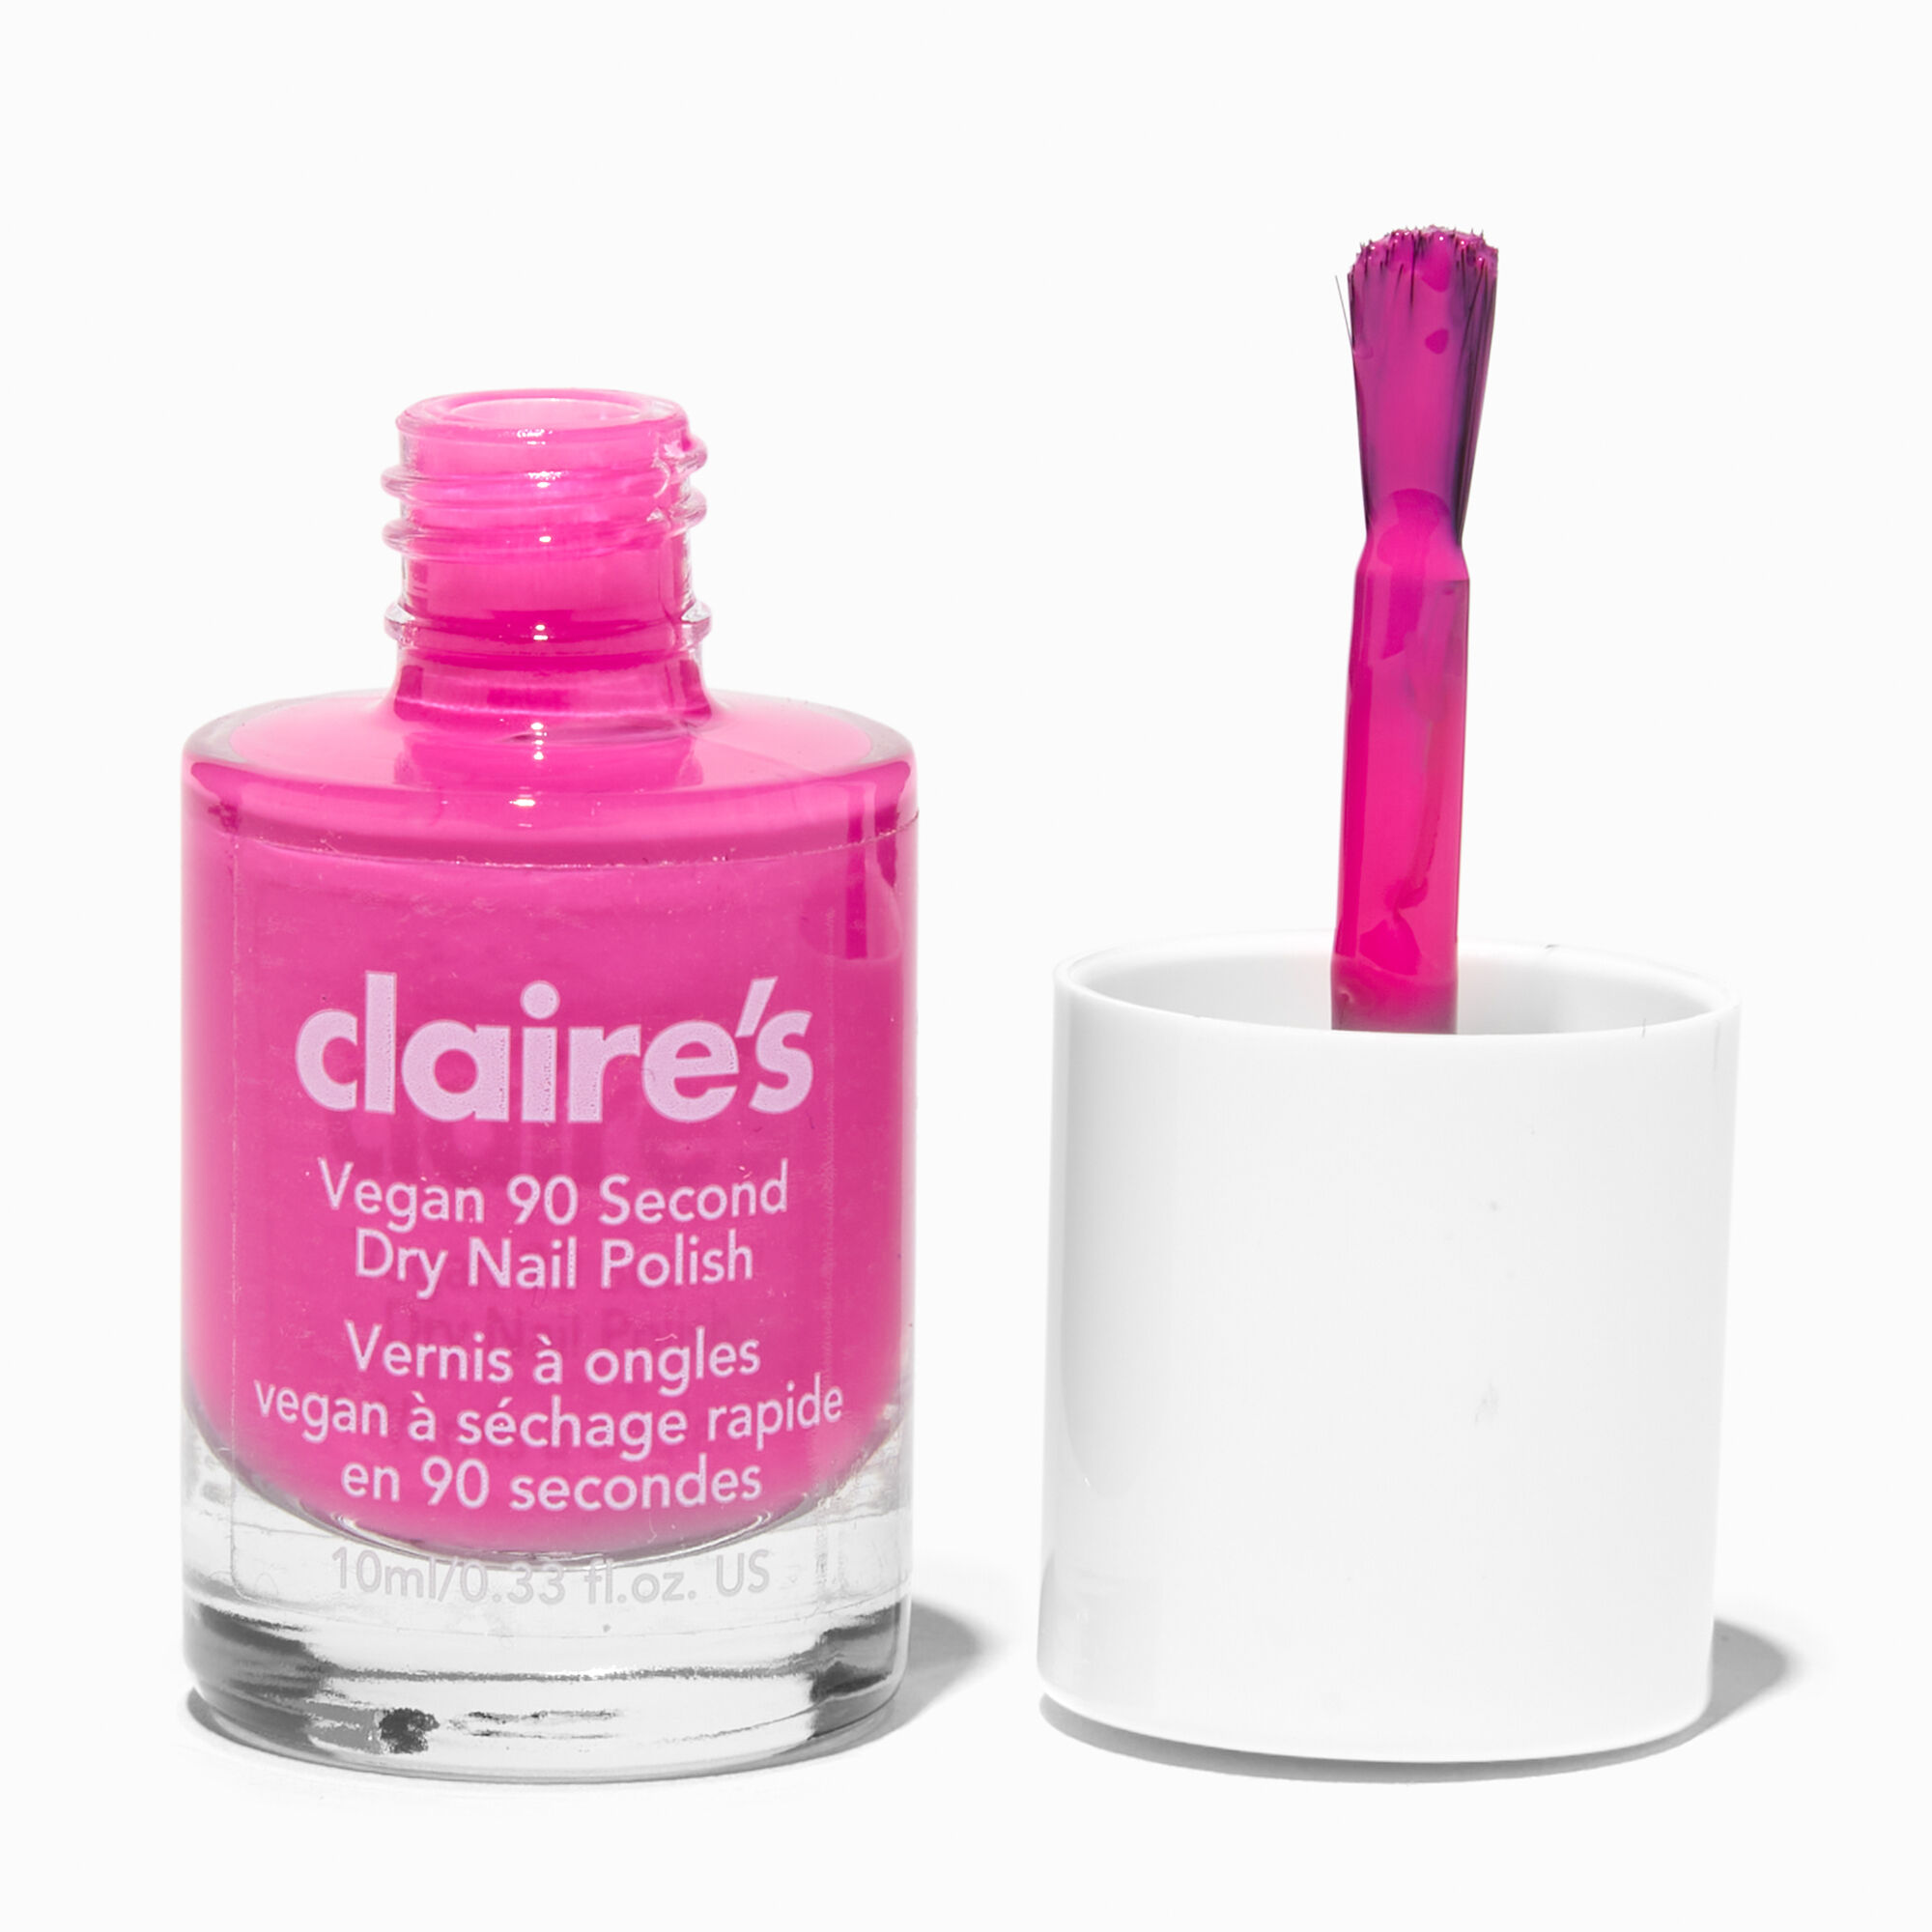 View Claires Vegan 90 Second Dry Nail Polish Model information